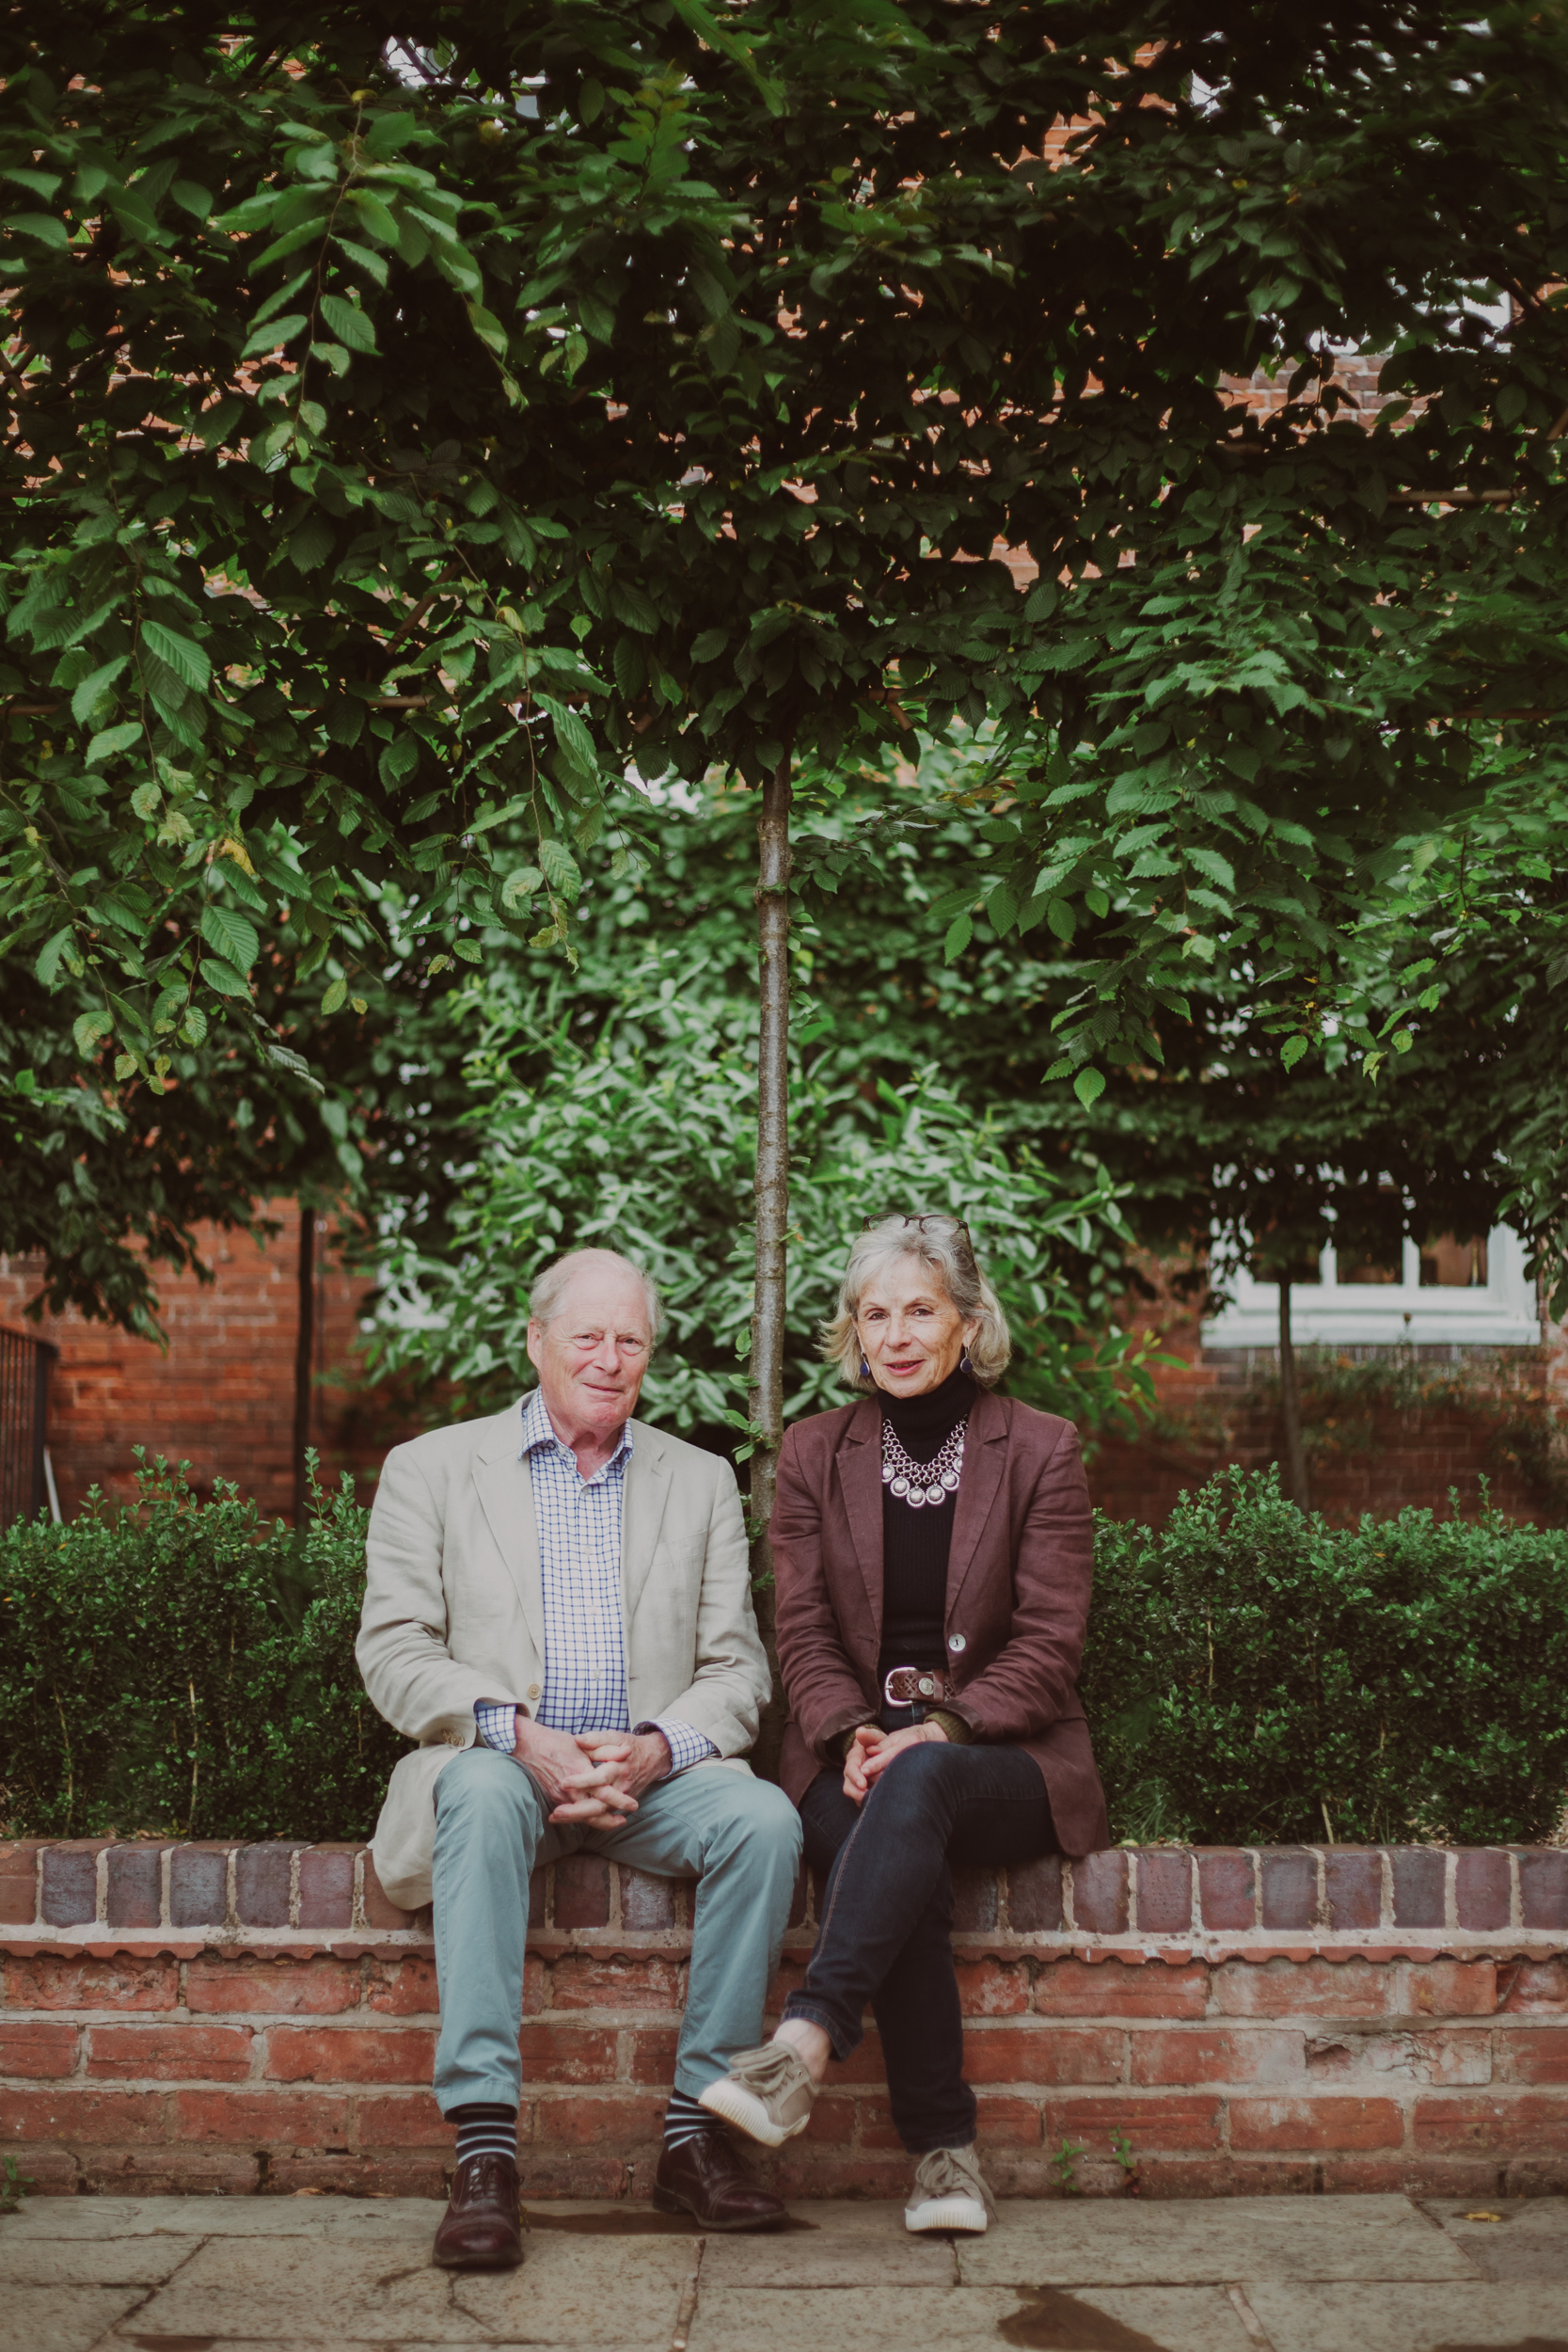 A man and lady sit next to one another outside underneath a pleached tree